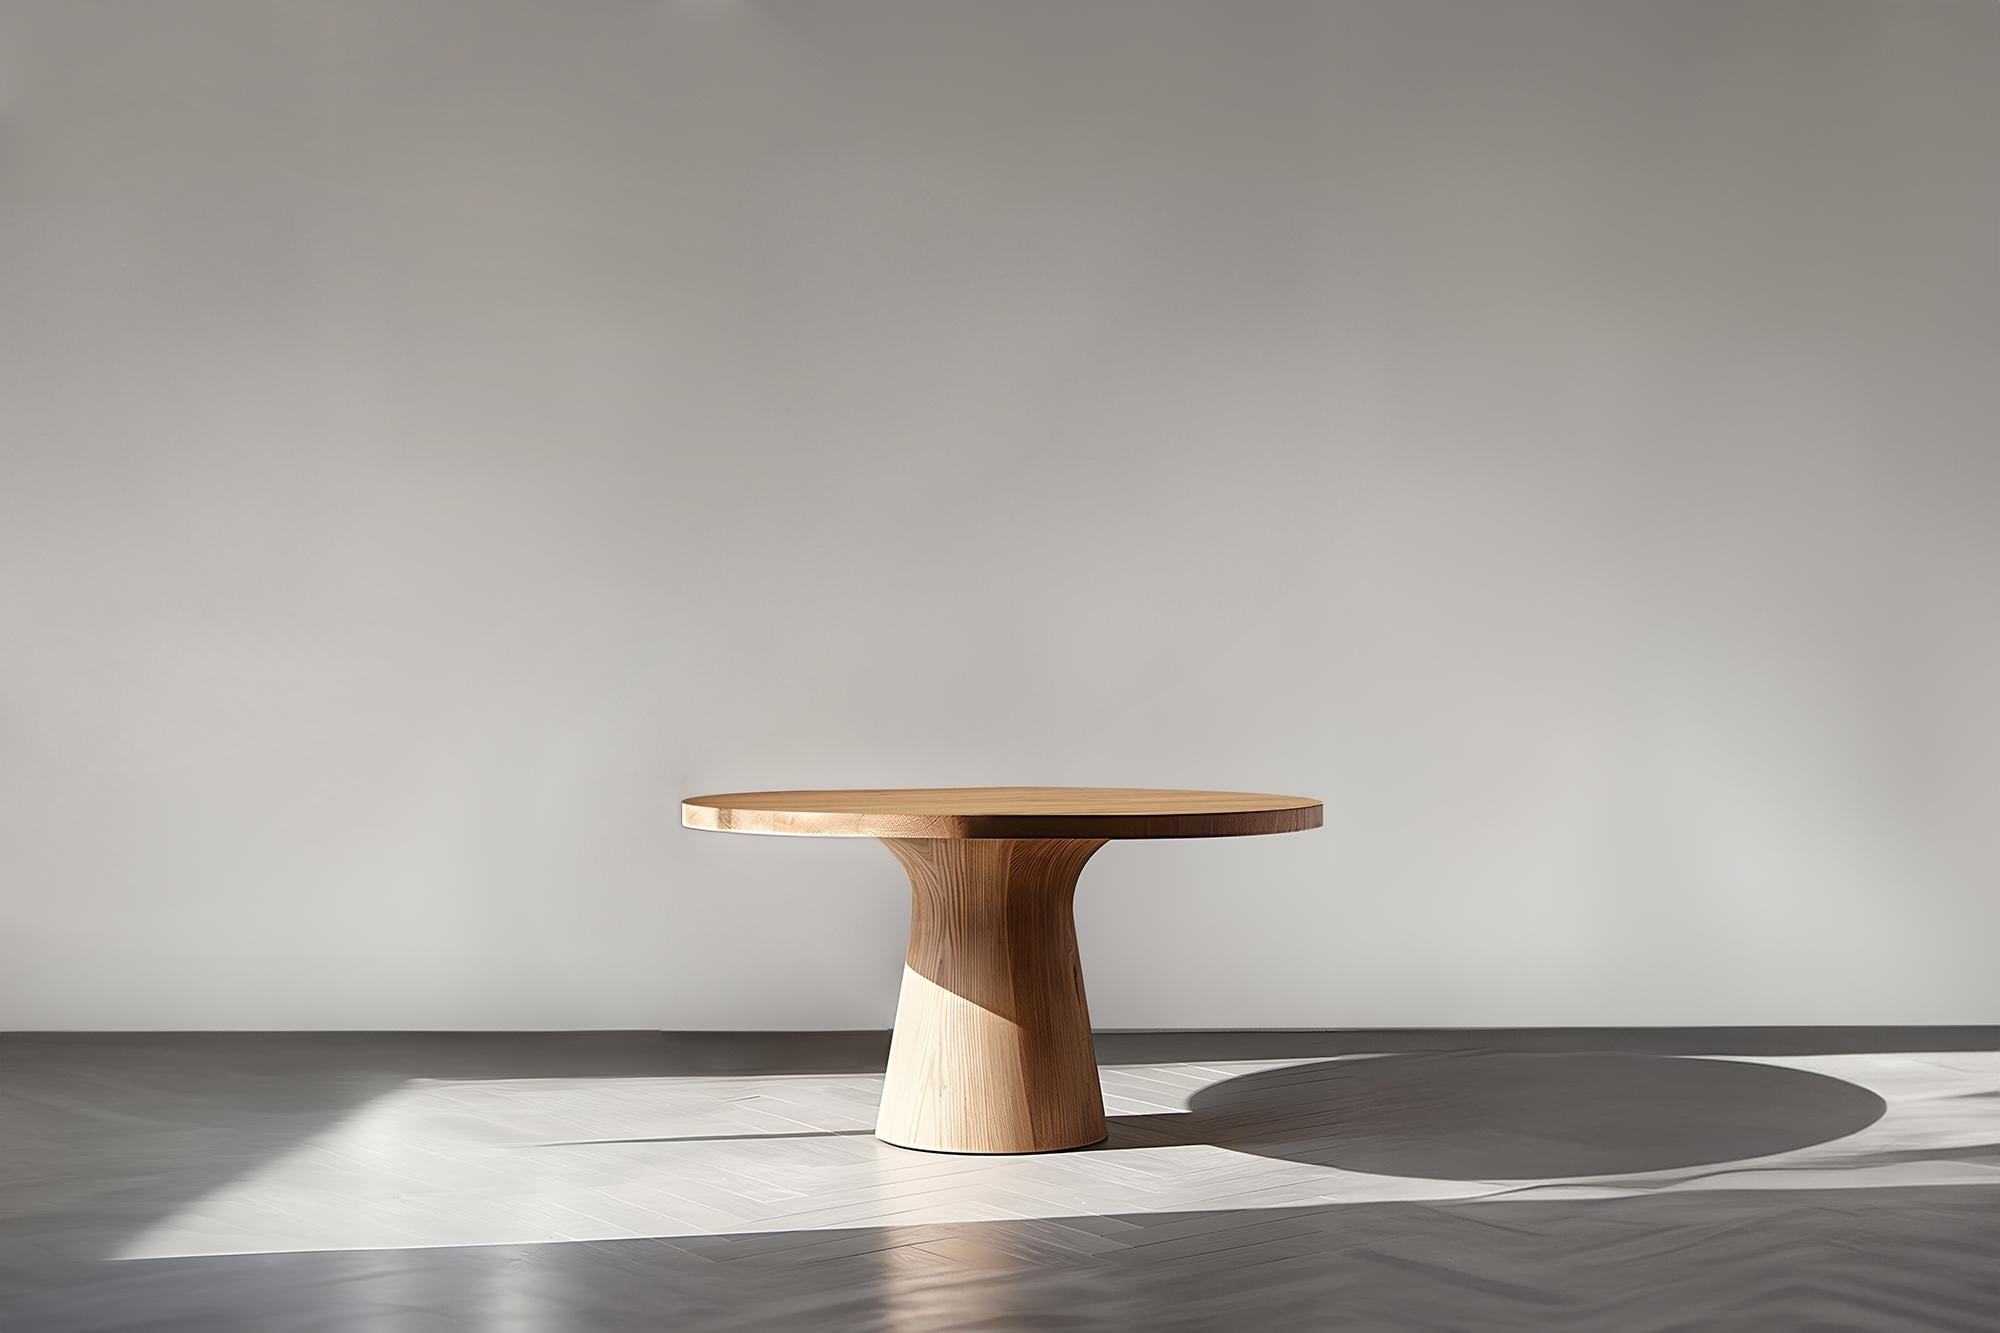 NONO's Socle Series No03, Cocktail Tables with a Wooden Twist

——

Introducing the 